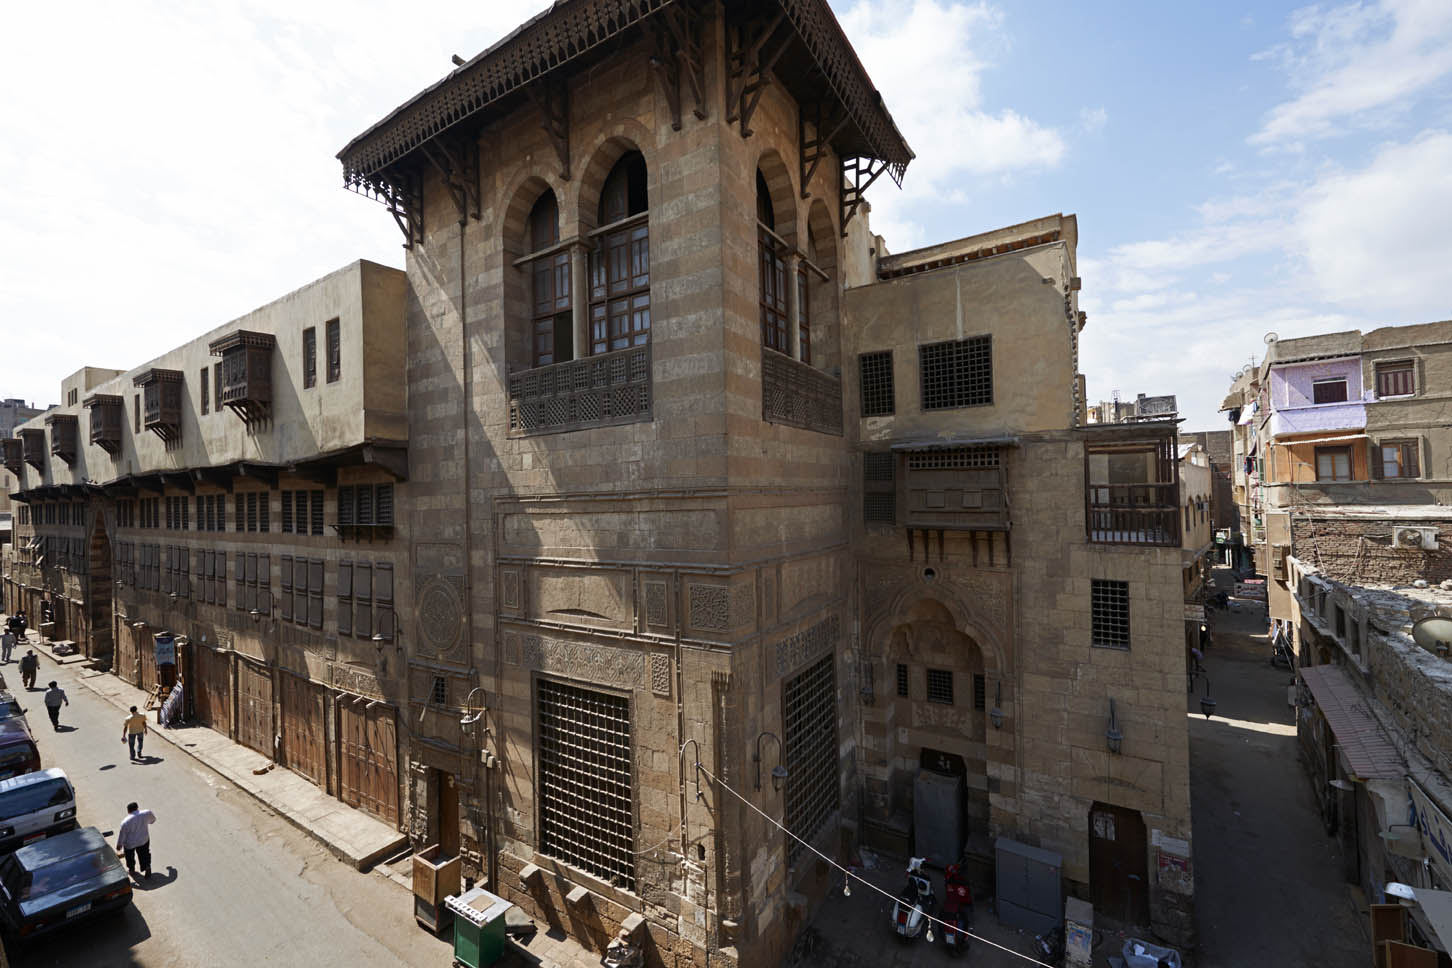 Elevated exterior view of sabil-kuttab, with wikala at left